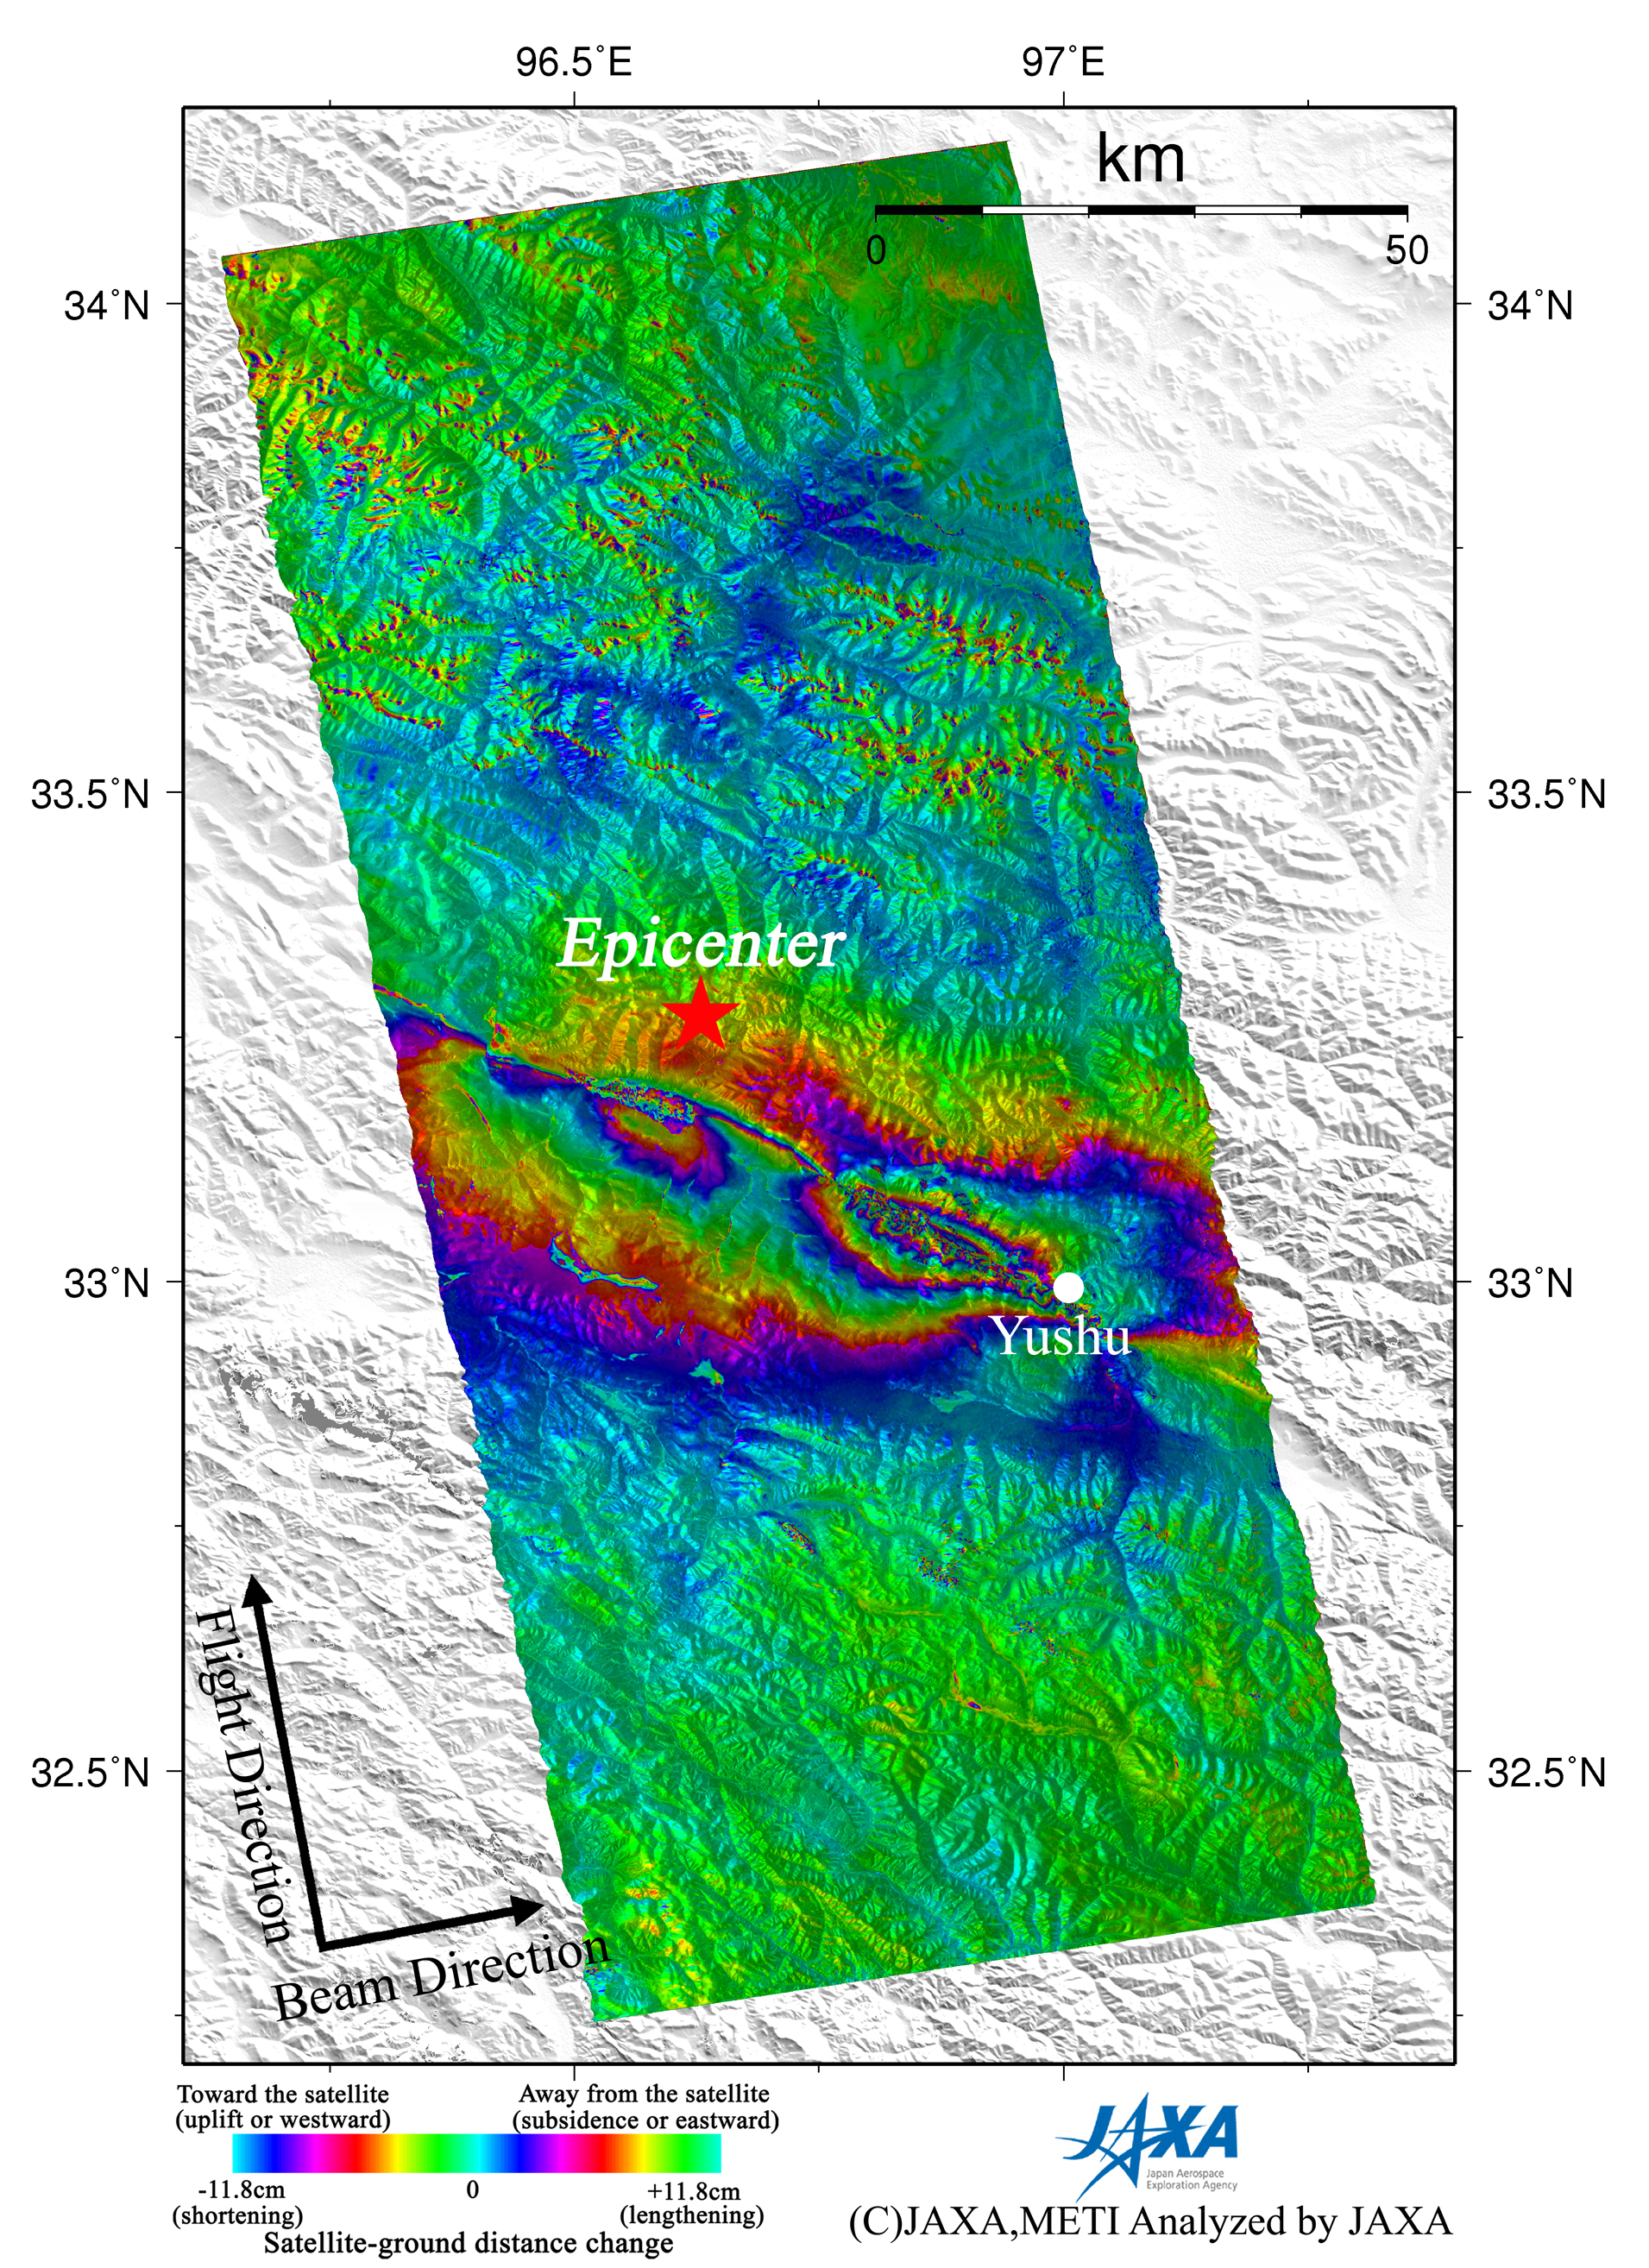 Figure 2 left is an interferogram generated from PALSAR data acquired before (Jan. 15, 2010) and after (Apr. 17, 2010) the earthquake using the DInSAR technique. A color pattern illustrates changes of satellite-ground distance for the period.